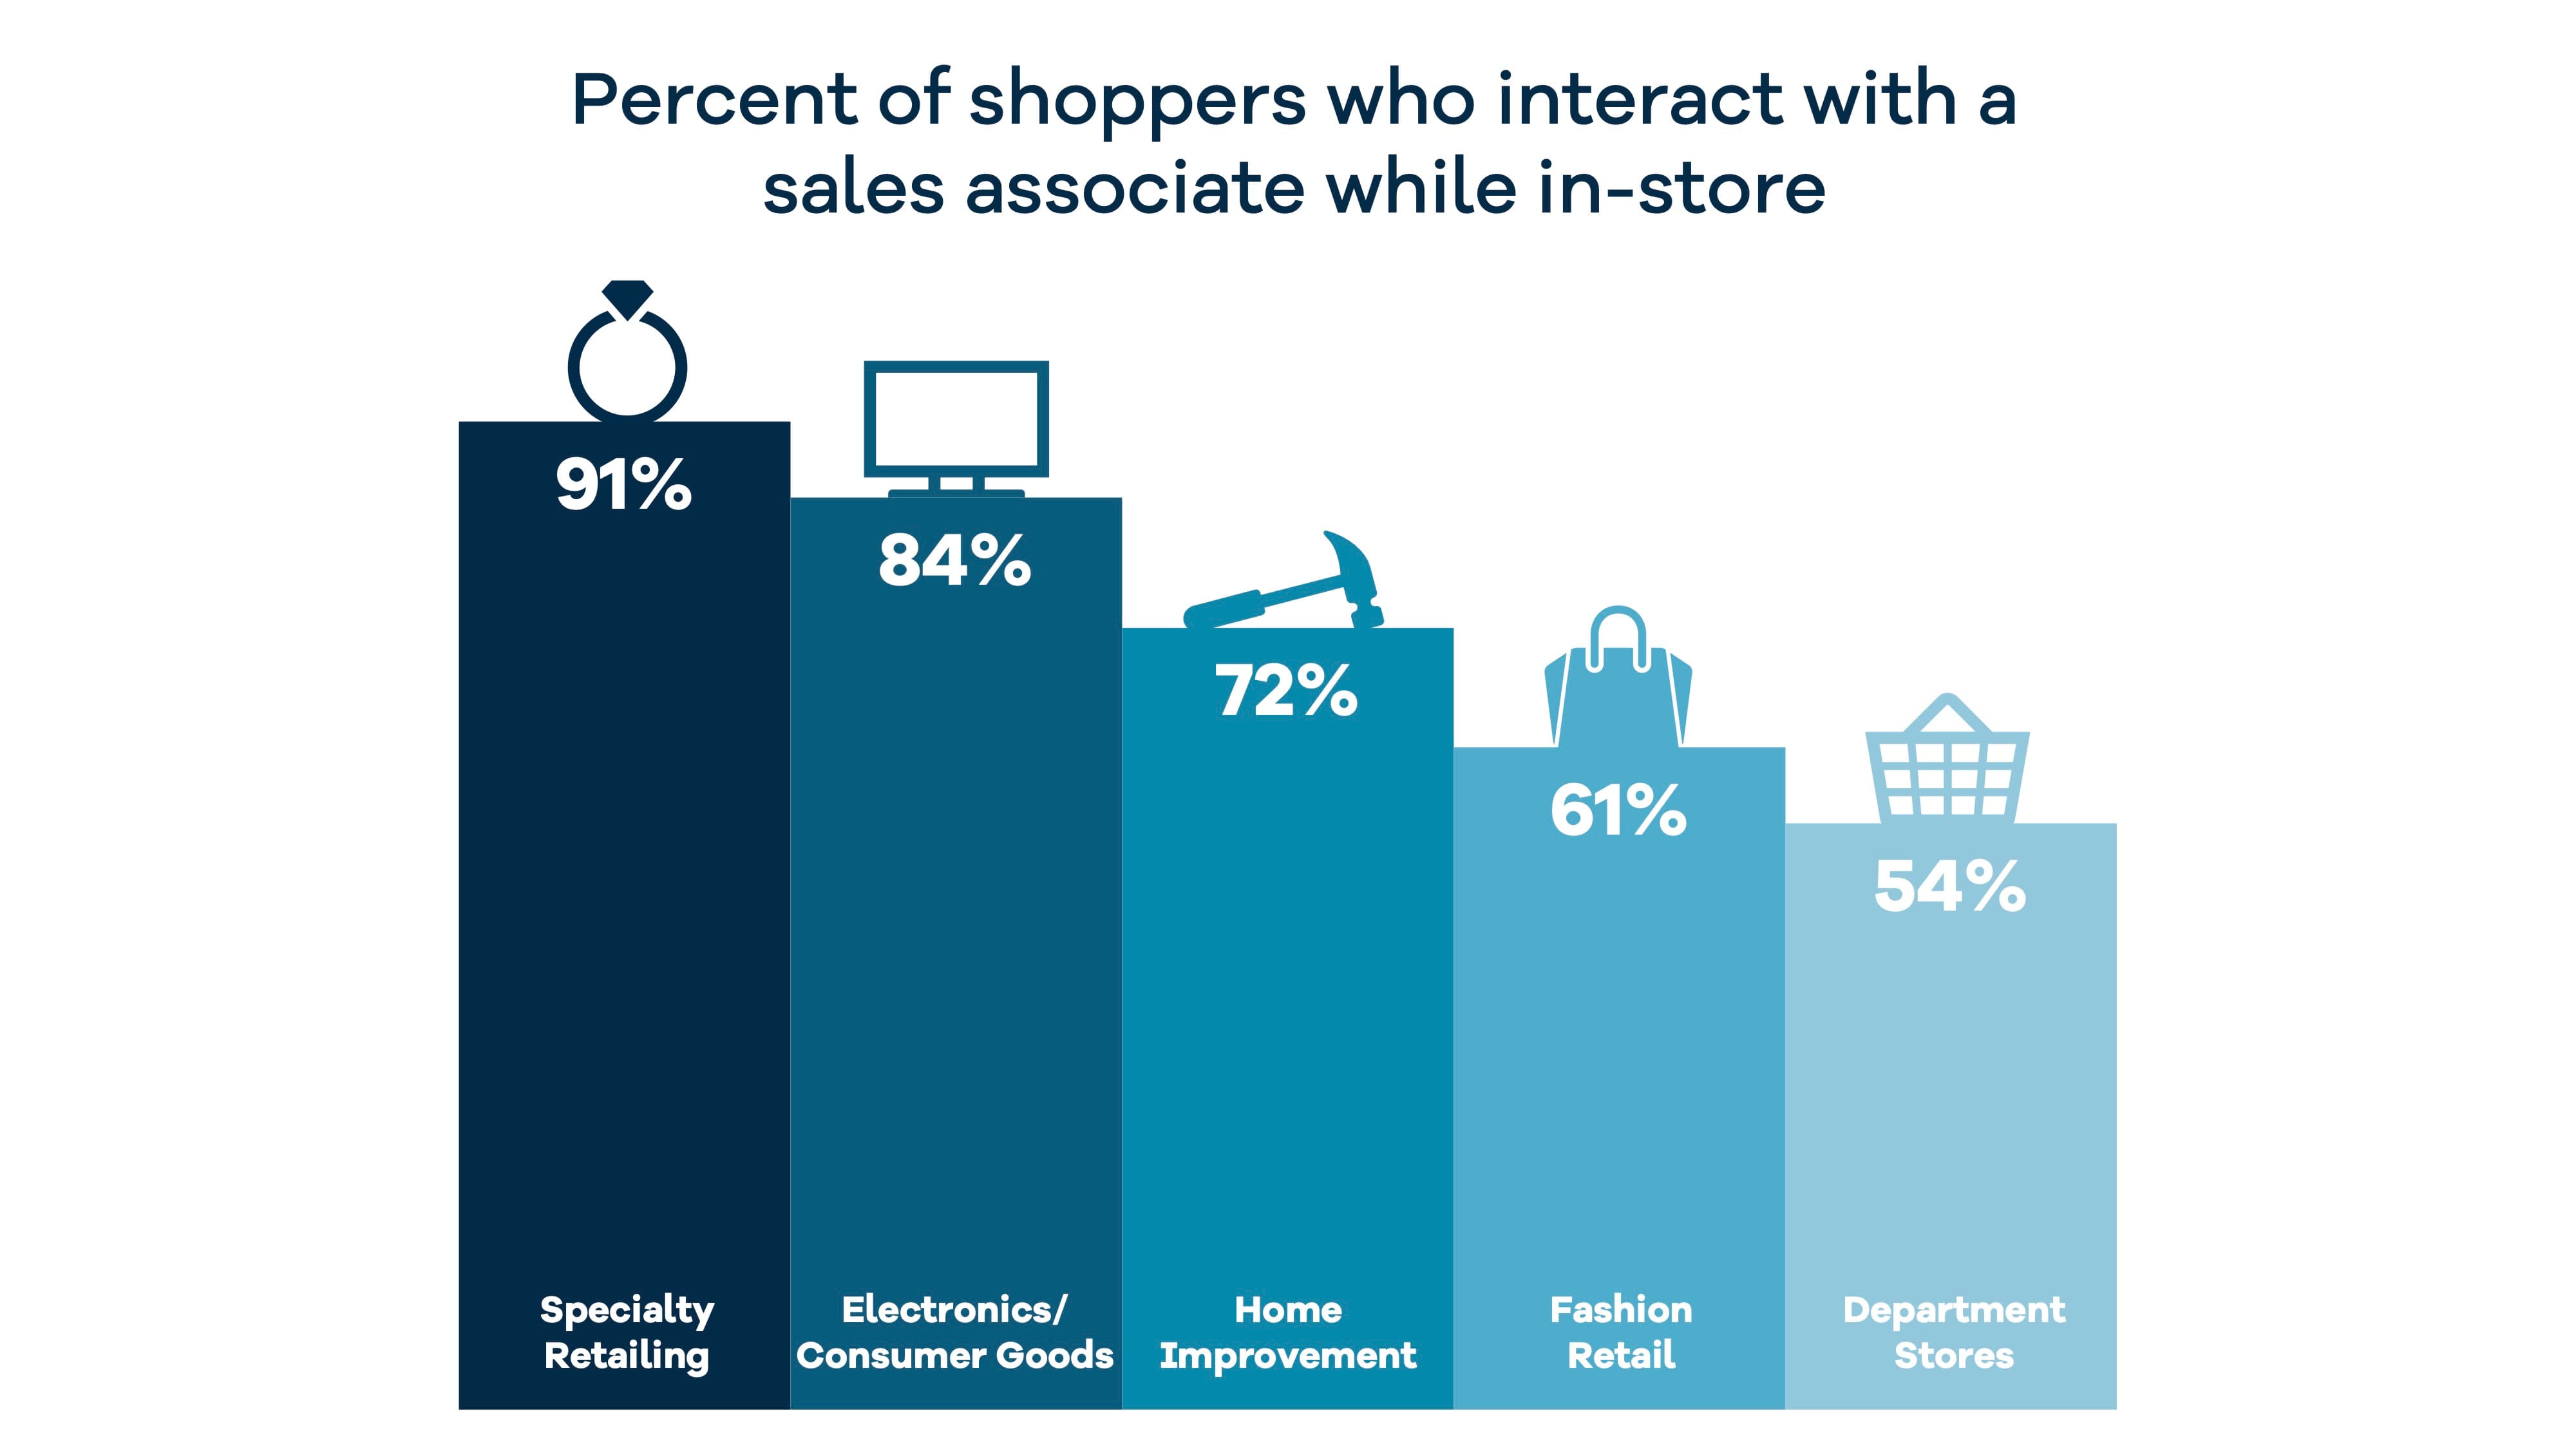 Mindtree Study: Sales associates play pivotal role in the shopper purchase journey